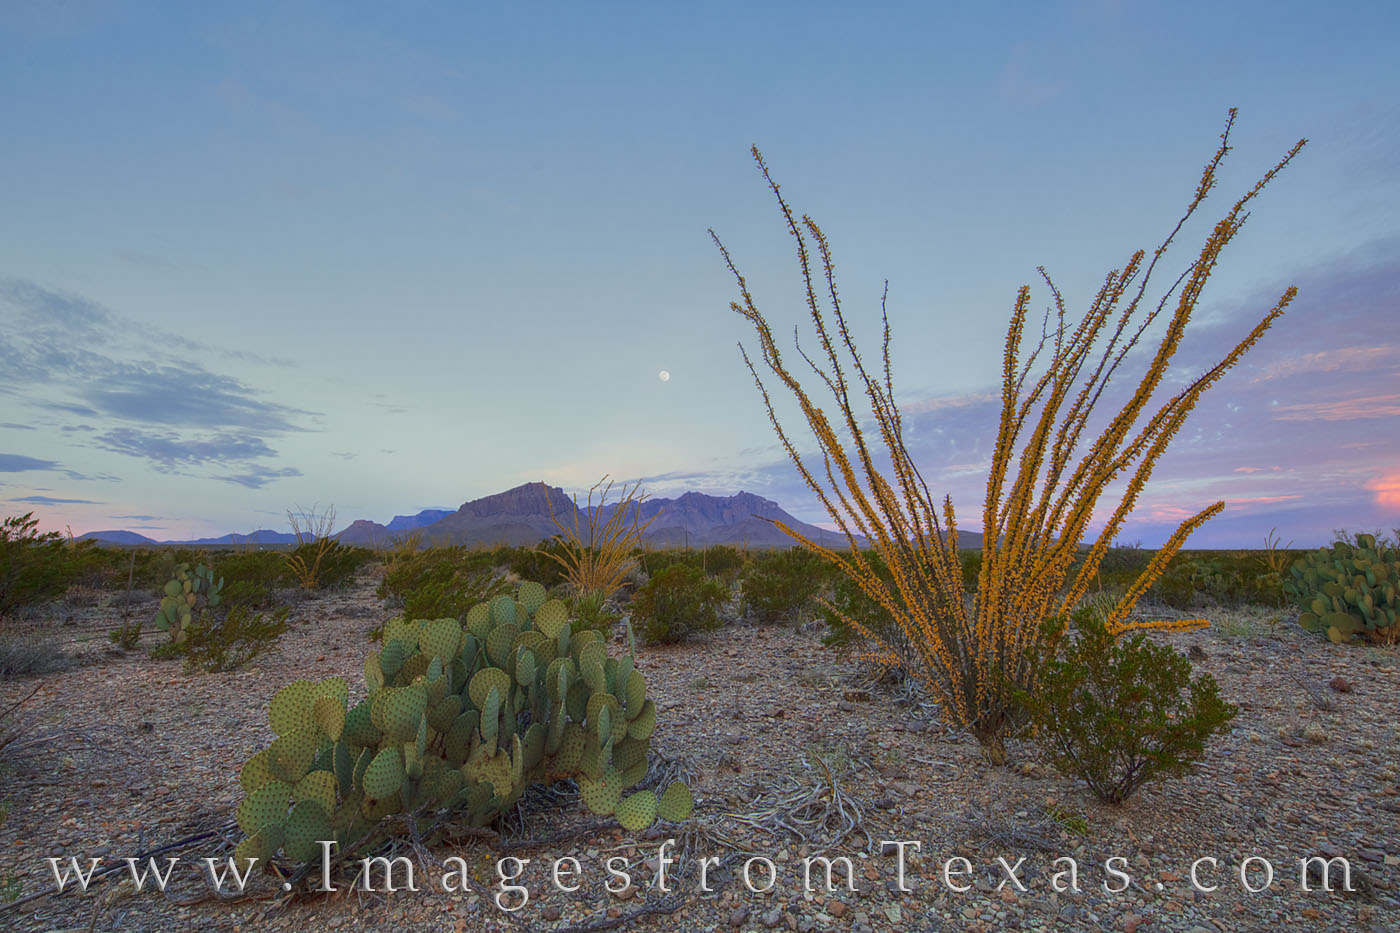 The Chihuahuan Desert that surrounds the Chisos Mountains is an arid and harsh environment. Big Bend National Park is a place...